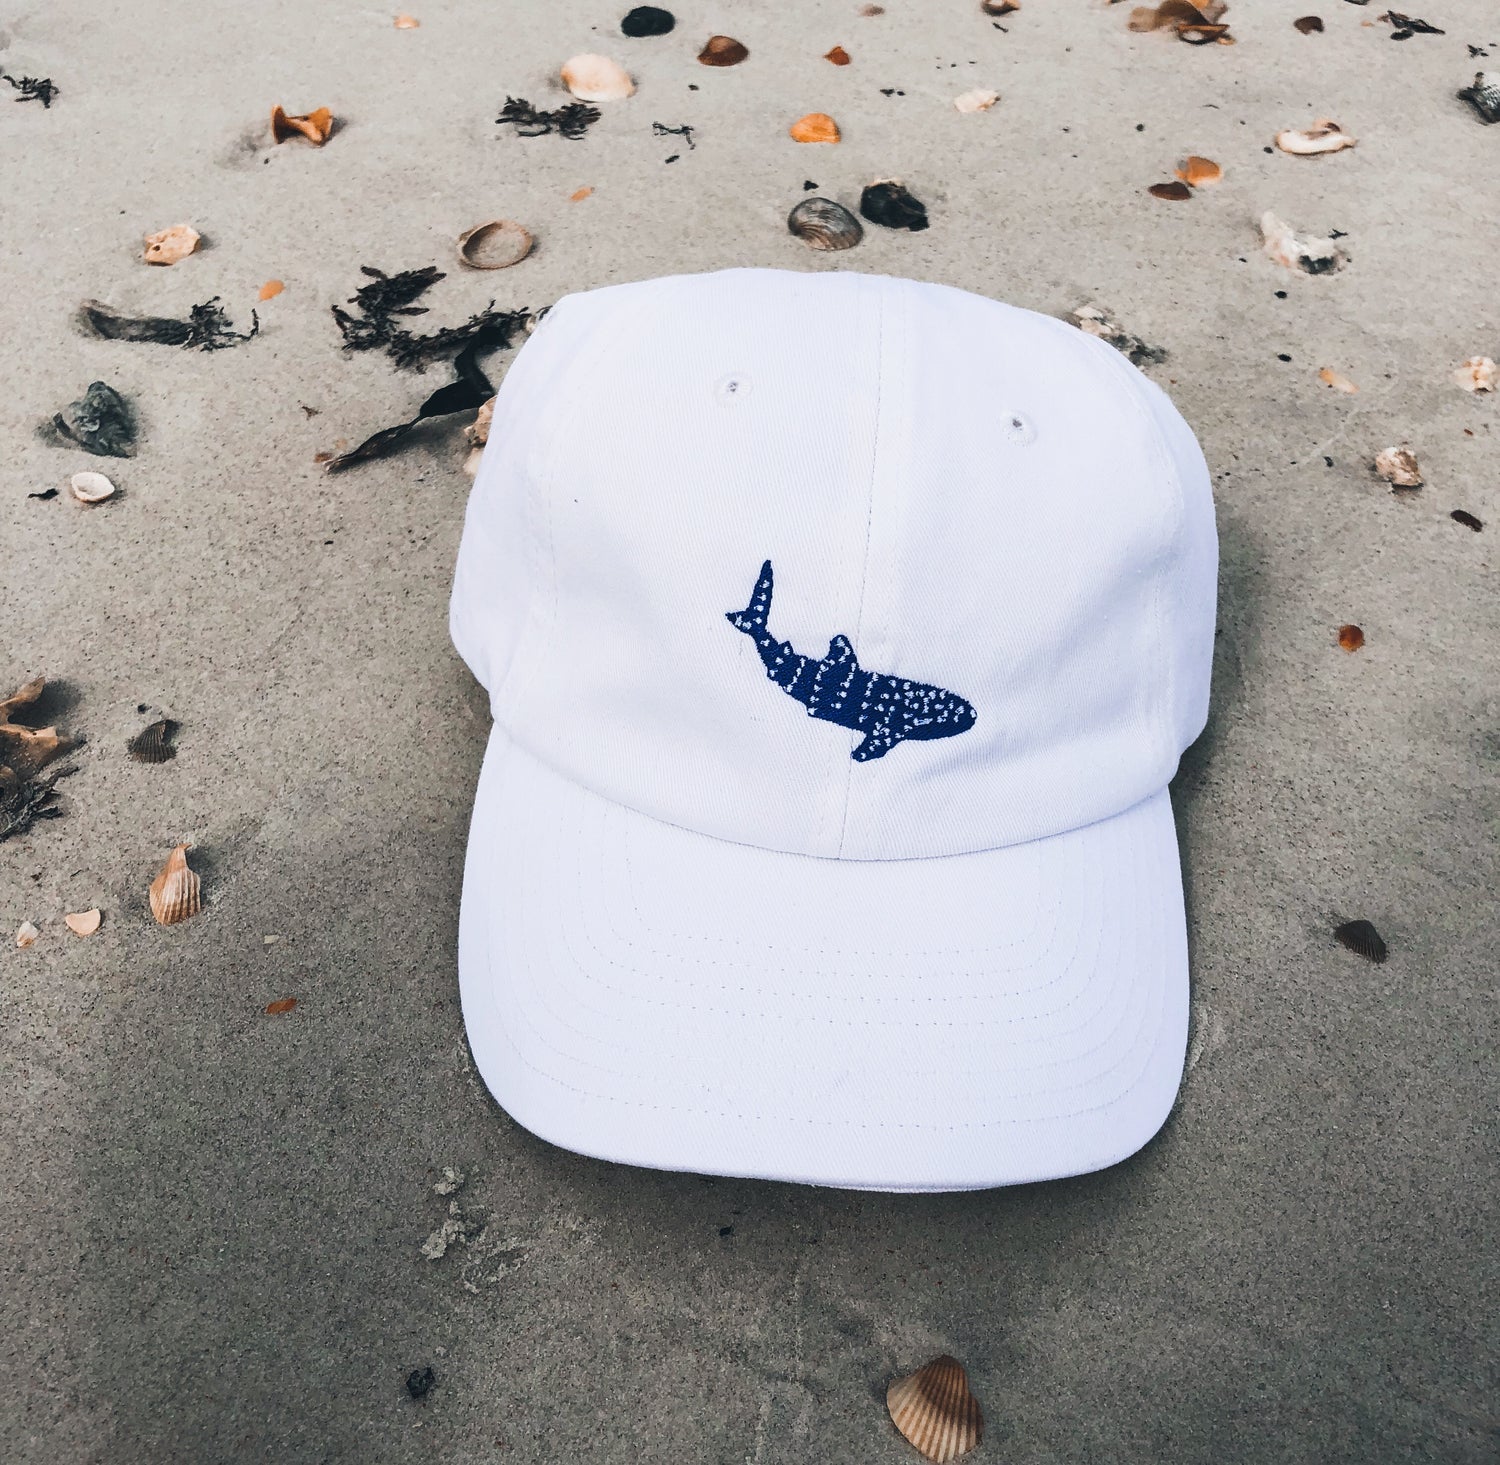 Connected Clothing Company Whale Shark Embroidered Cotton Cap on a beach - 10% of profits donated to Mission Blue ocean conservation efforts - ethically and sustainably made clothing